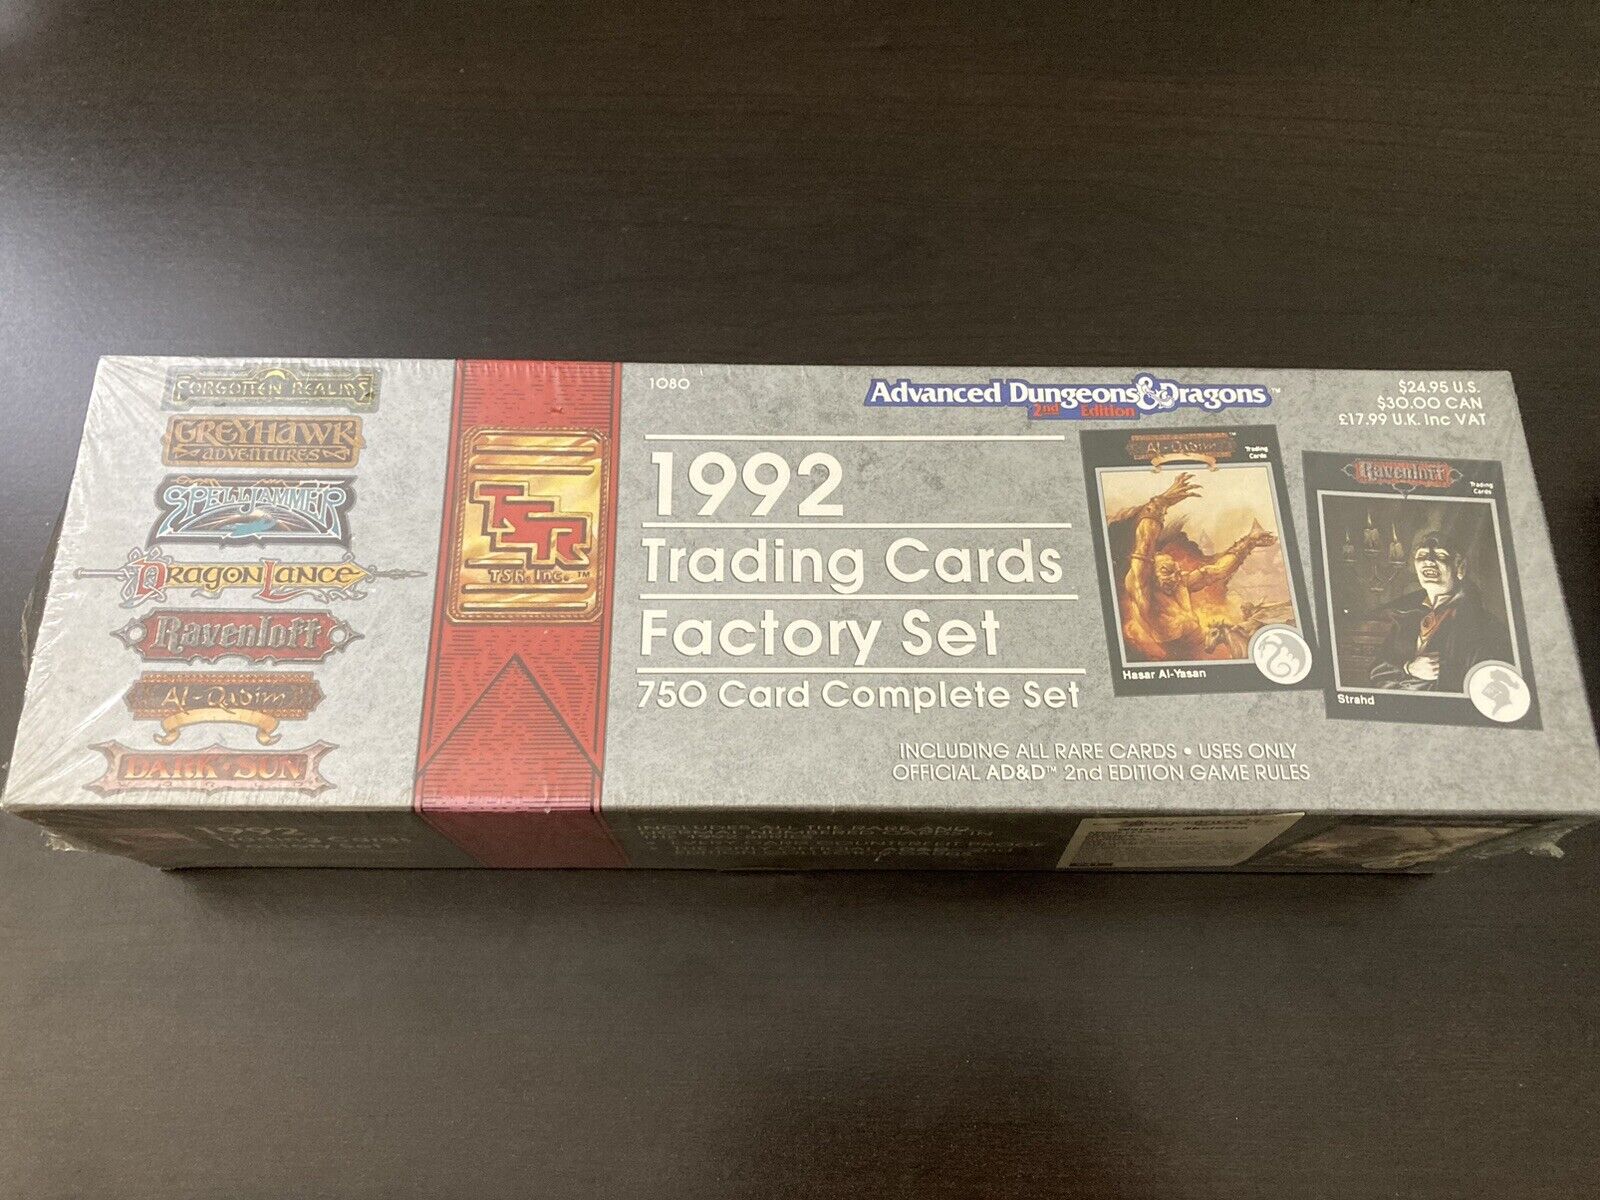 Advanced Dungeons & Dragons Trading Cards Factory Set 1992 